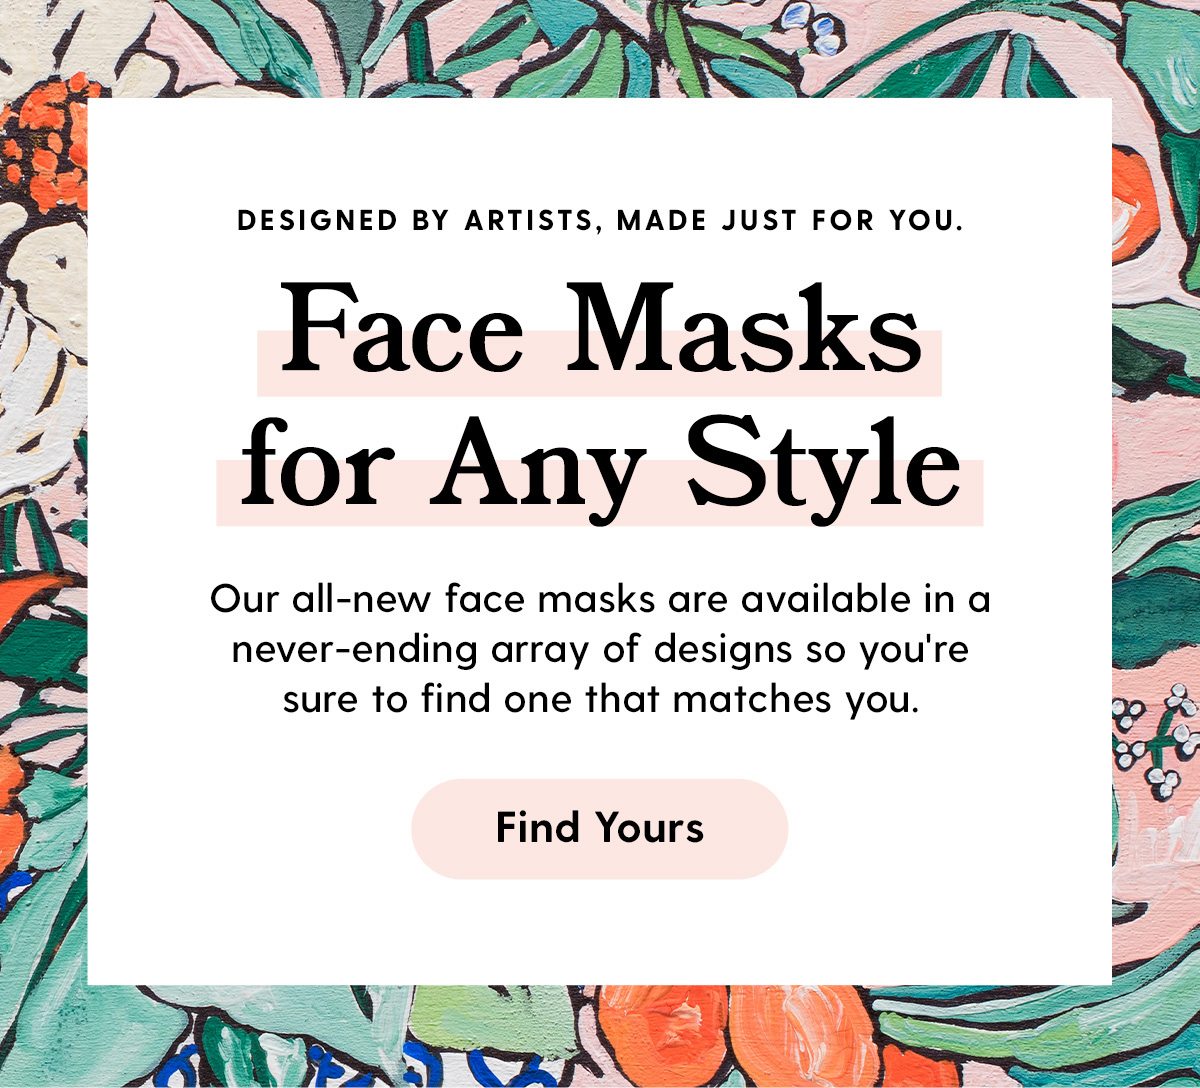 Designed by artists, made just for you. Face Masks for Any Style Our all-new face masks are available in a never-ending array of designs so you're sure to find one that matches you. Find Yours